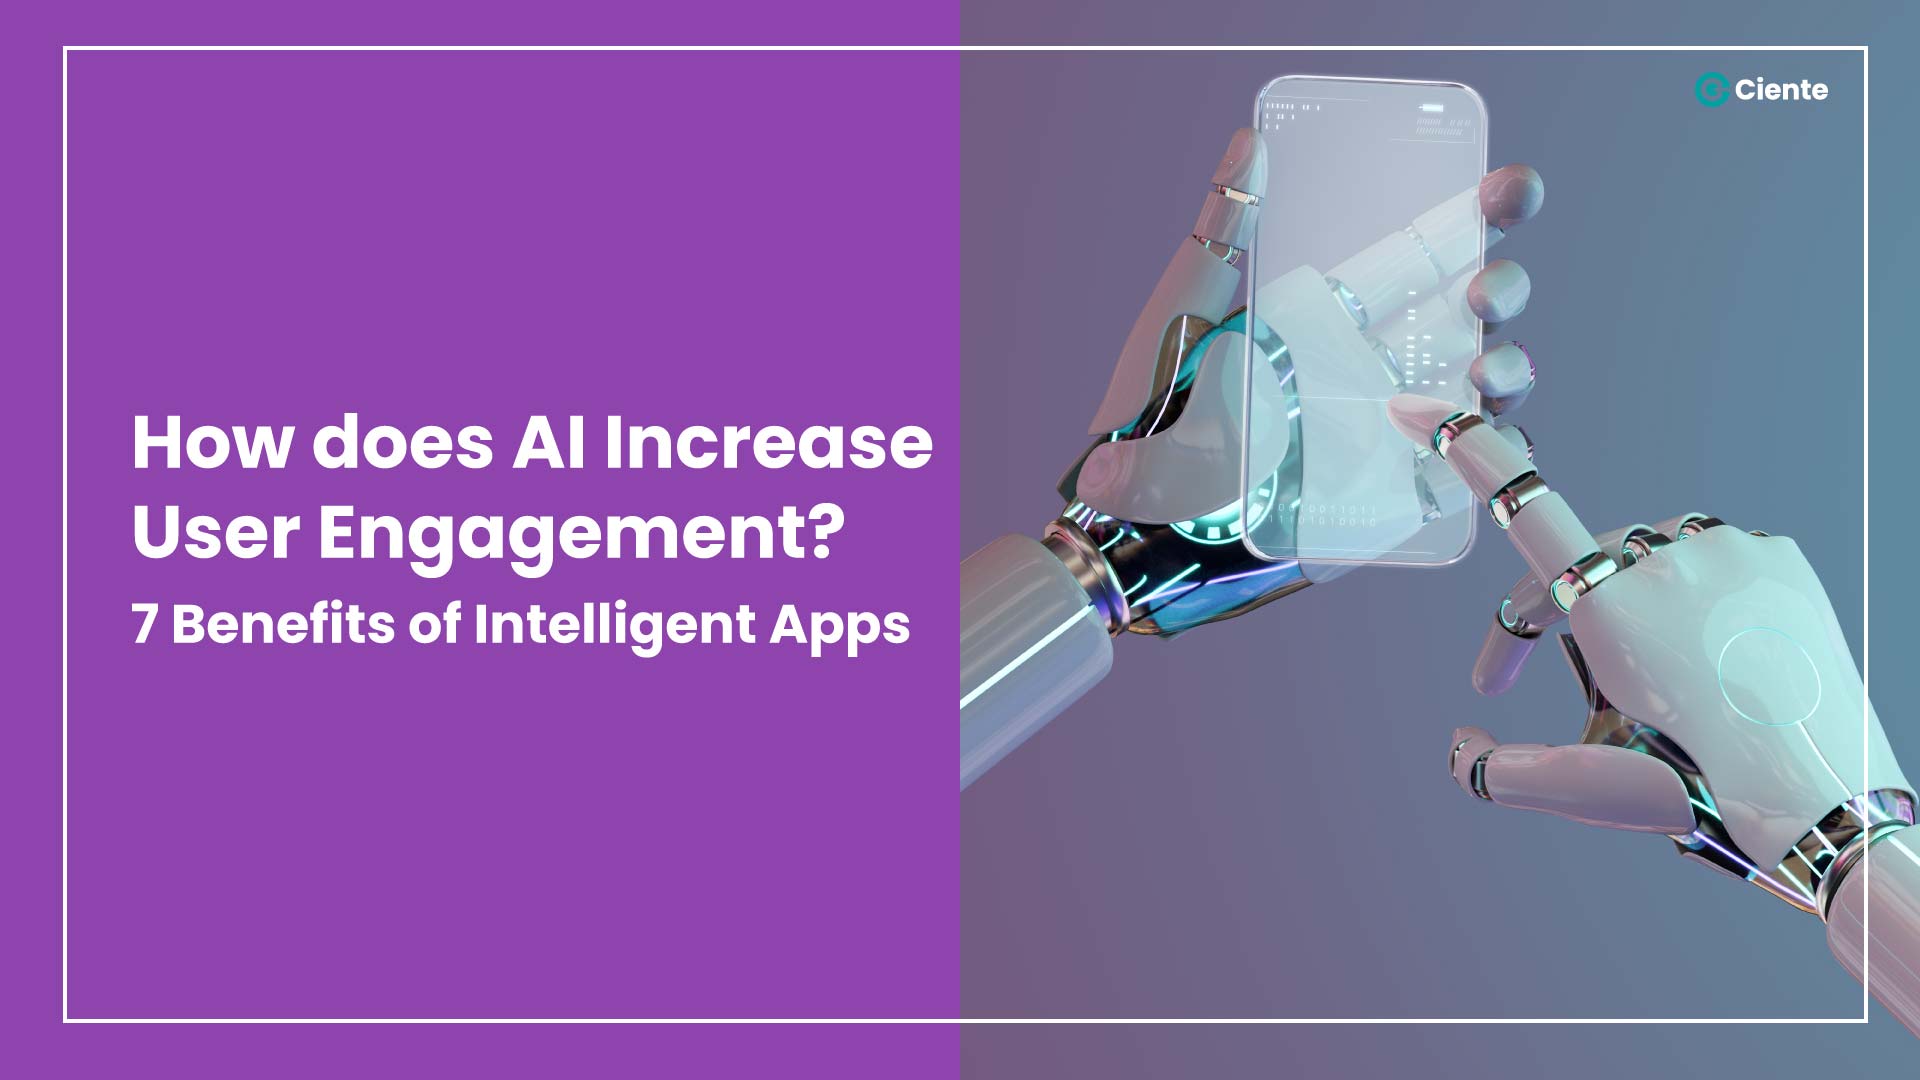 How Does AI Increase User Engagement? Intelligent Apps